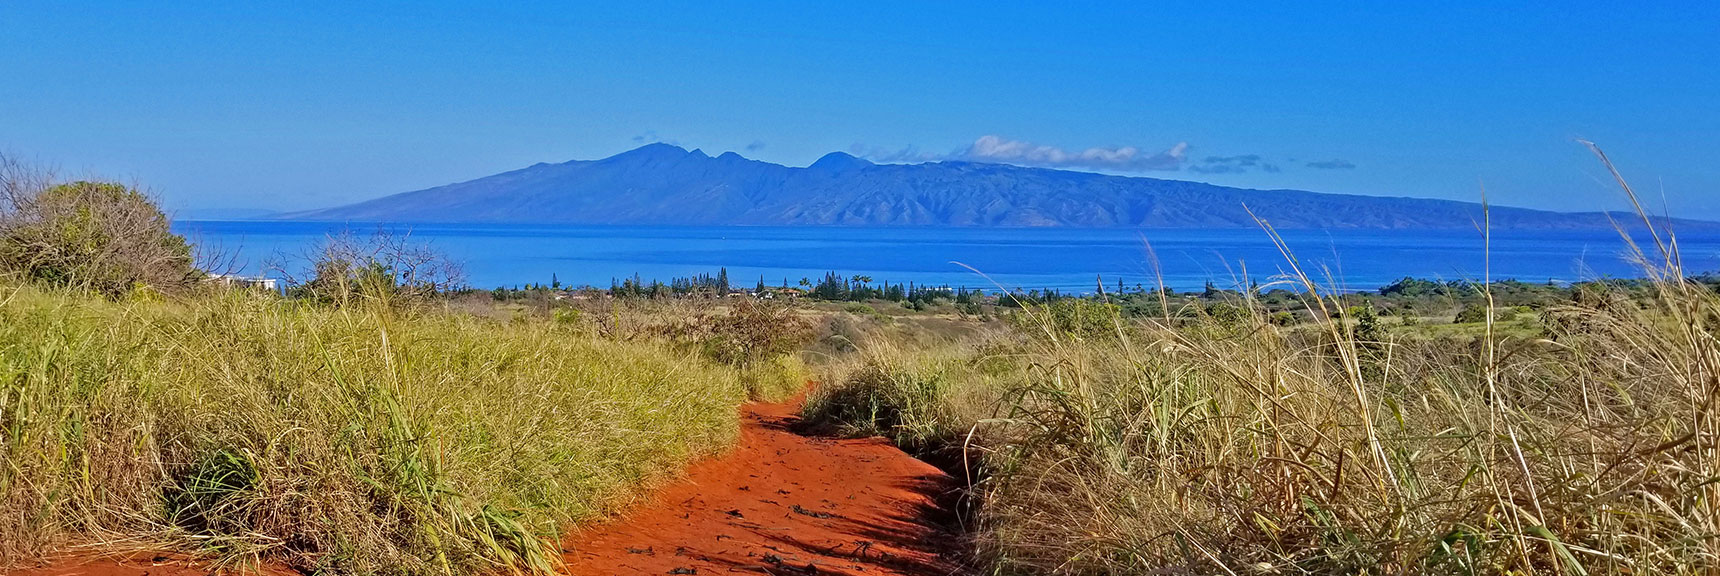 Higher View of Moloka'i Island from Road System | Hidden Hills and Jungle Above Kahana in West Maui, Hawaii